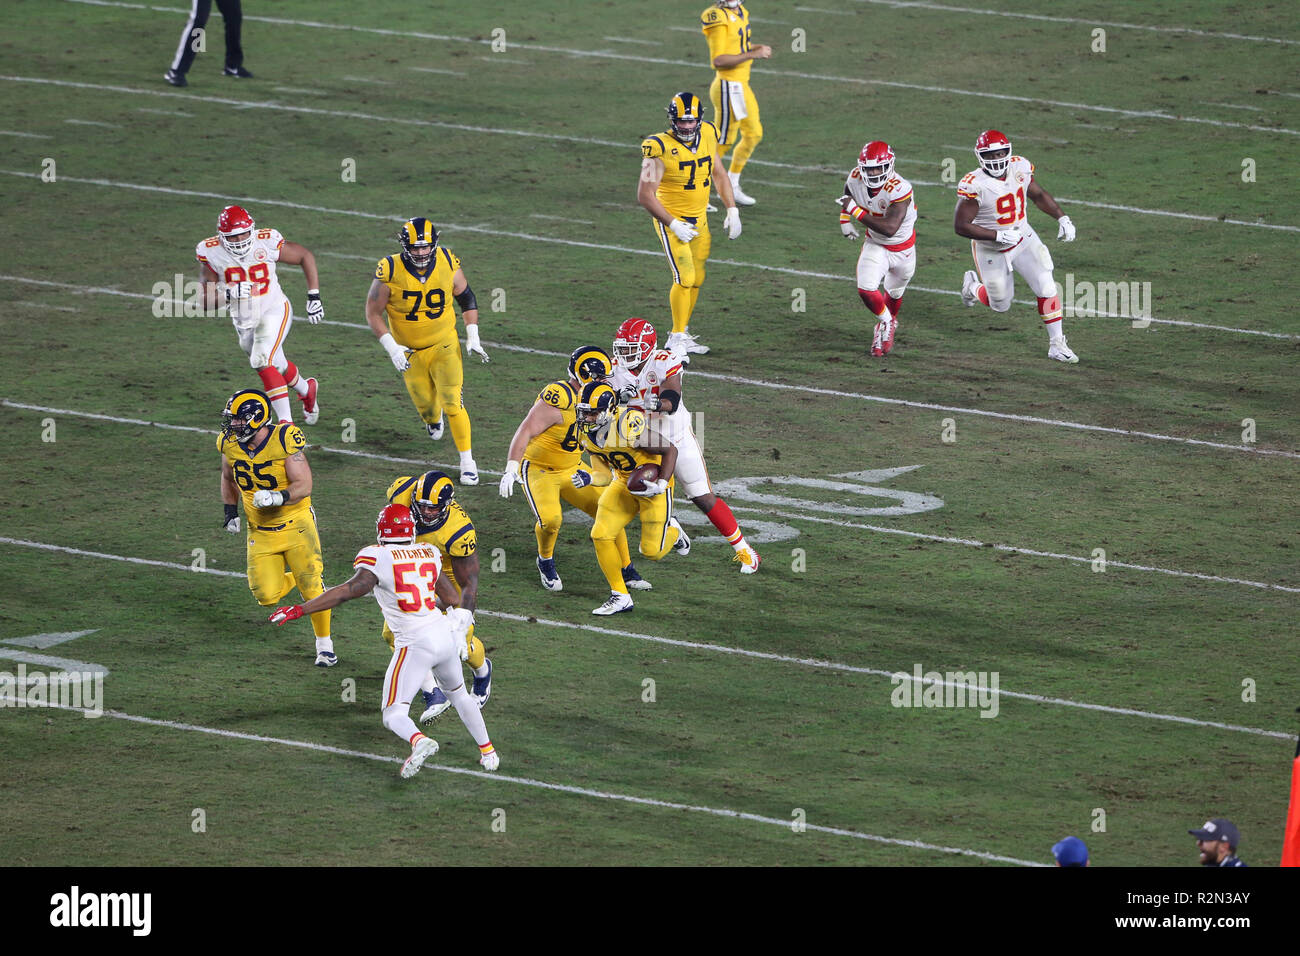 Los Angeles, CA, USA. 19th Nov, 2018. during the NFL Kansas City Chiefs vs Los Angeles Rams at the Los Angeles Memorial Coliseum in Los Angeles, Ca on November 19, 2018. Jevone Moore Credit: csm/Alamy Live News Stock Photo